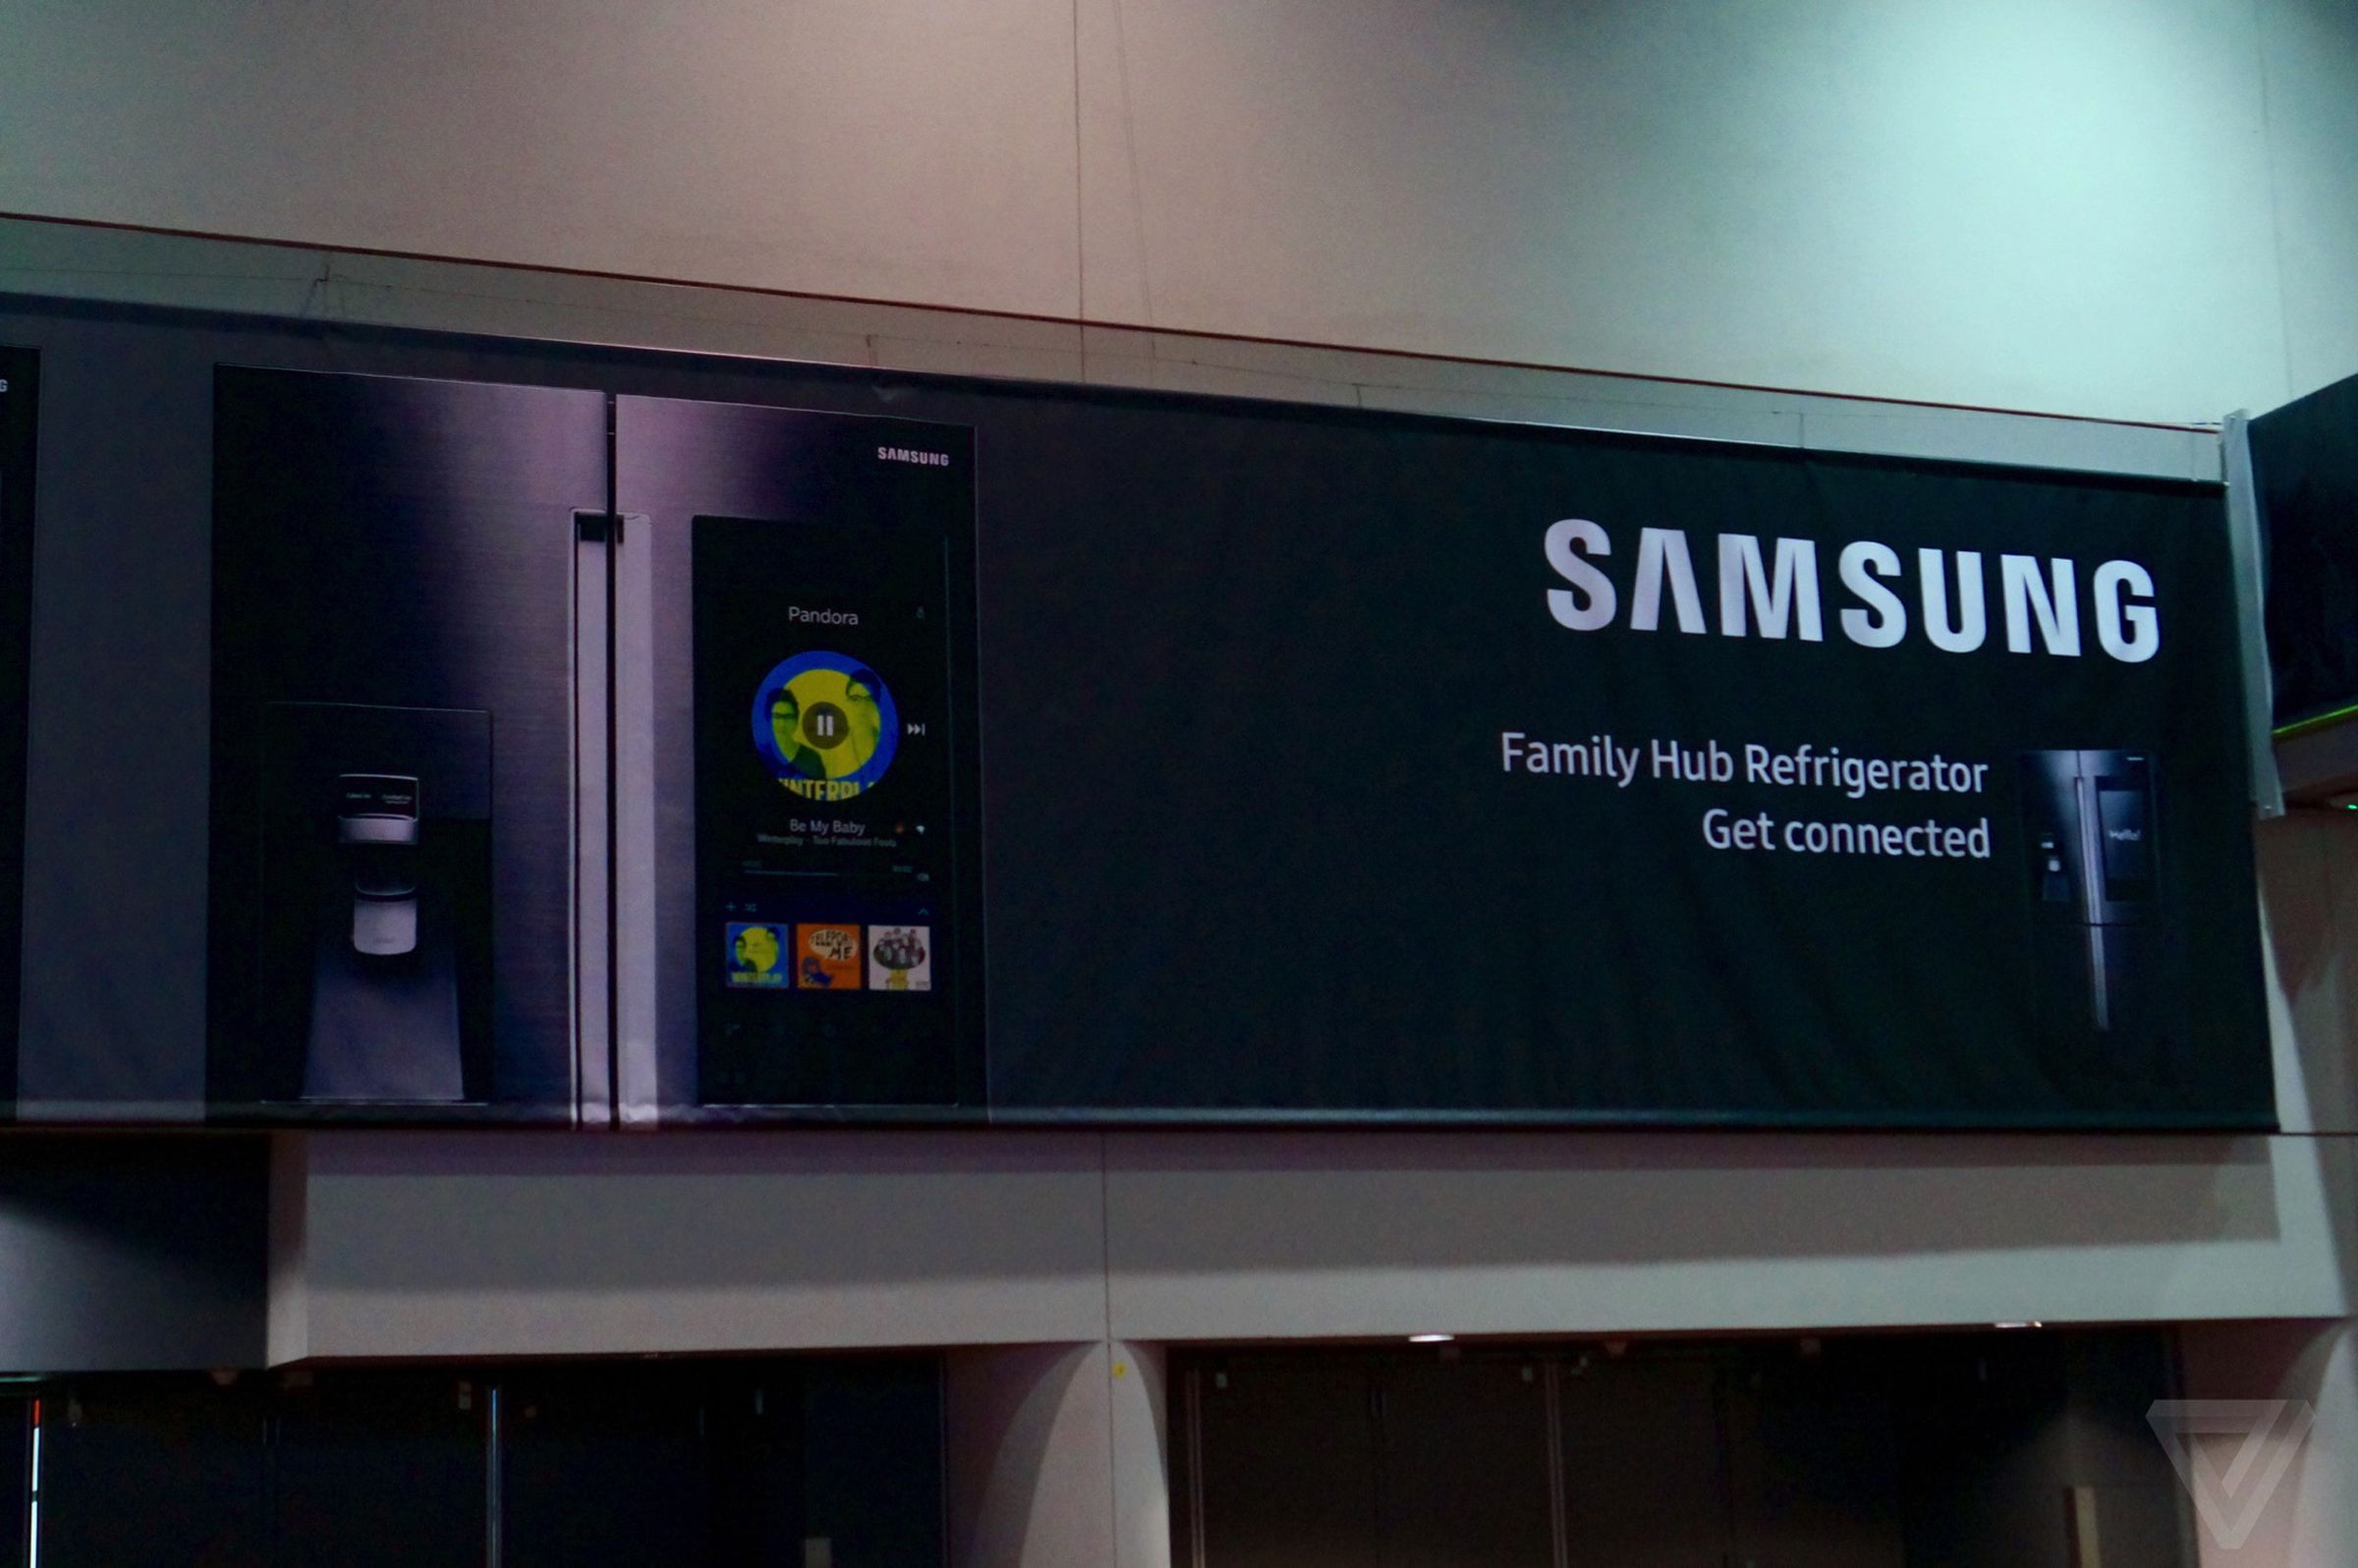 Pictures of Samsung's smart fridge with a massive touchscreen